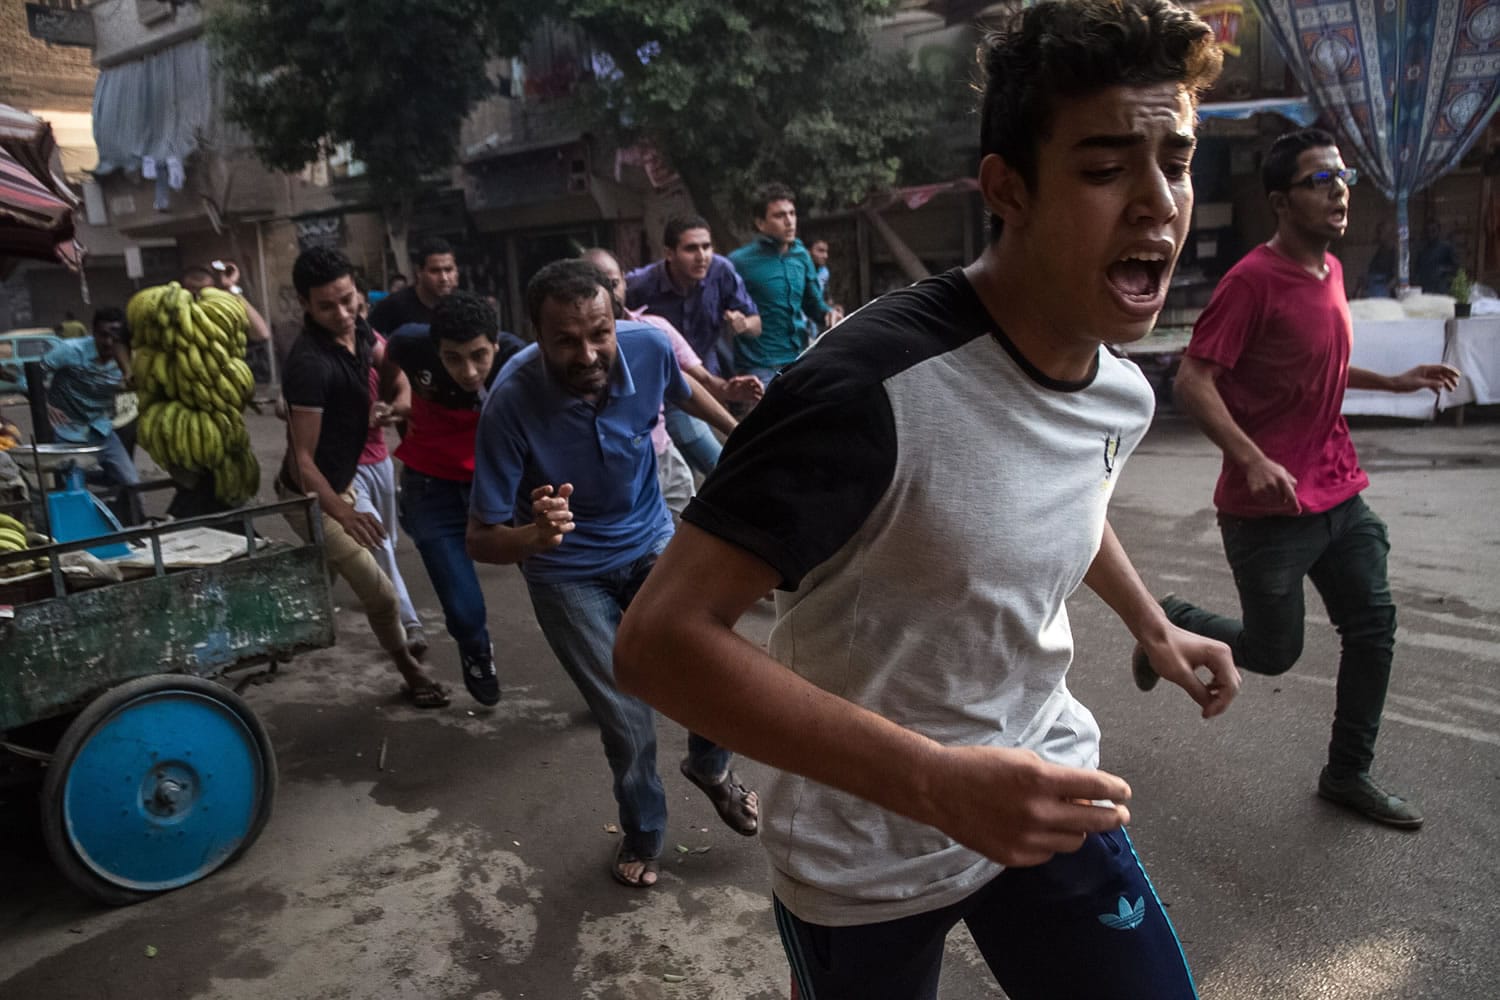 Protesters affiliated with the Muslim Brotherhood run in fear of Egyptian police forces opening fire towards them during a protest on the second anniversary of the ouster of Islamist President Mohammed Morsi in the Matariya district of Cairo.